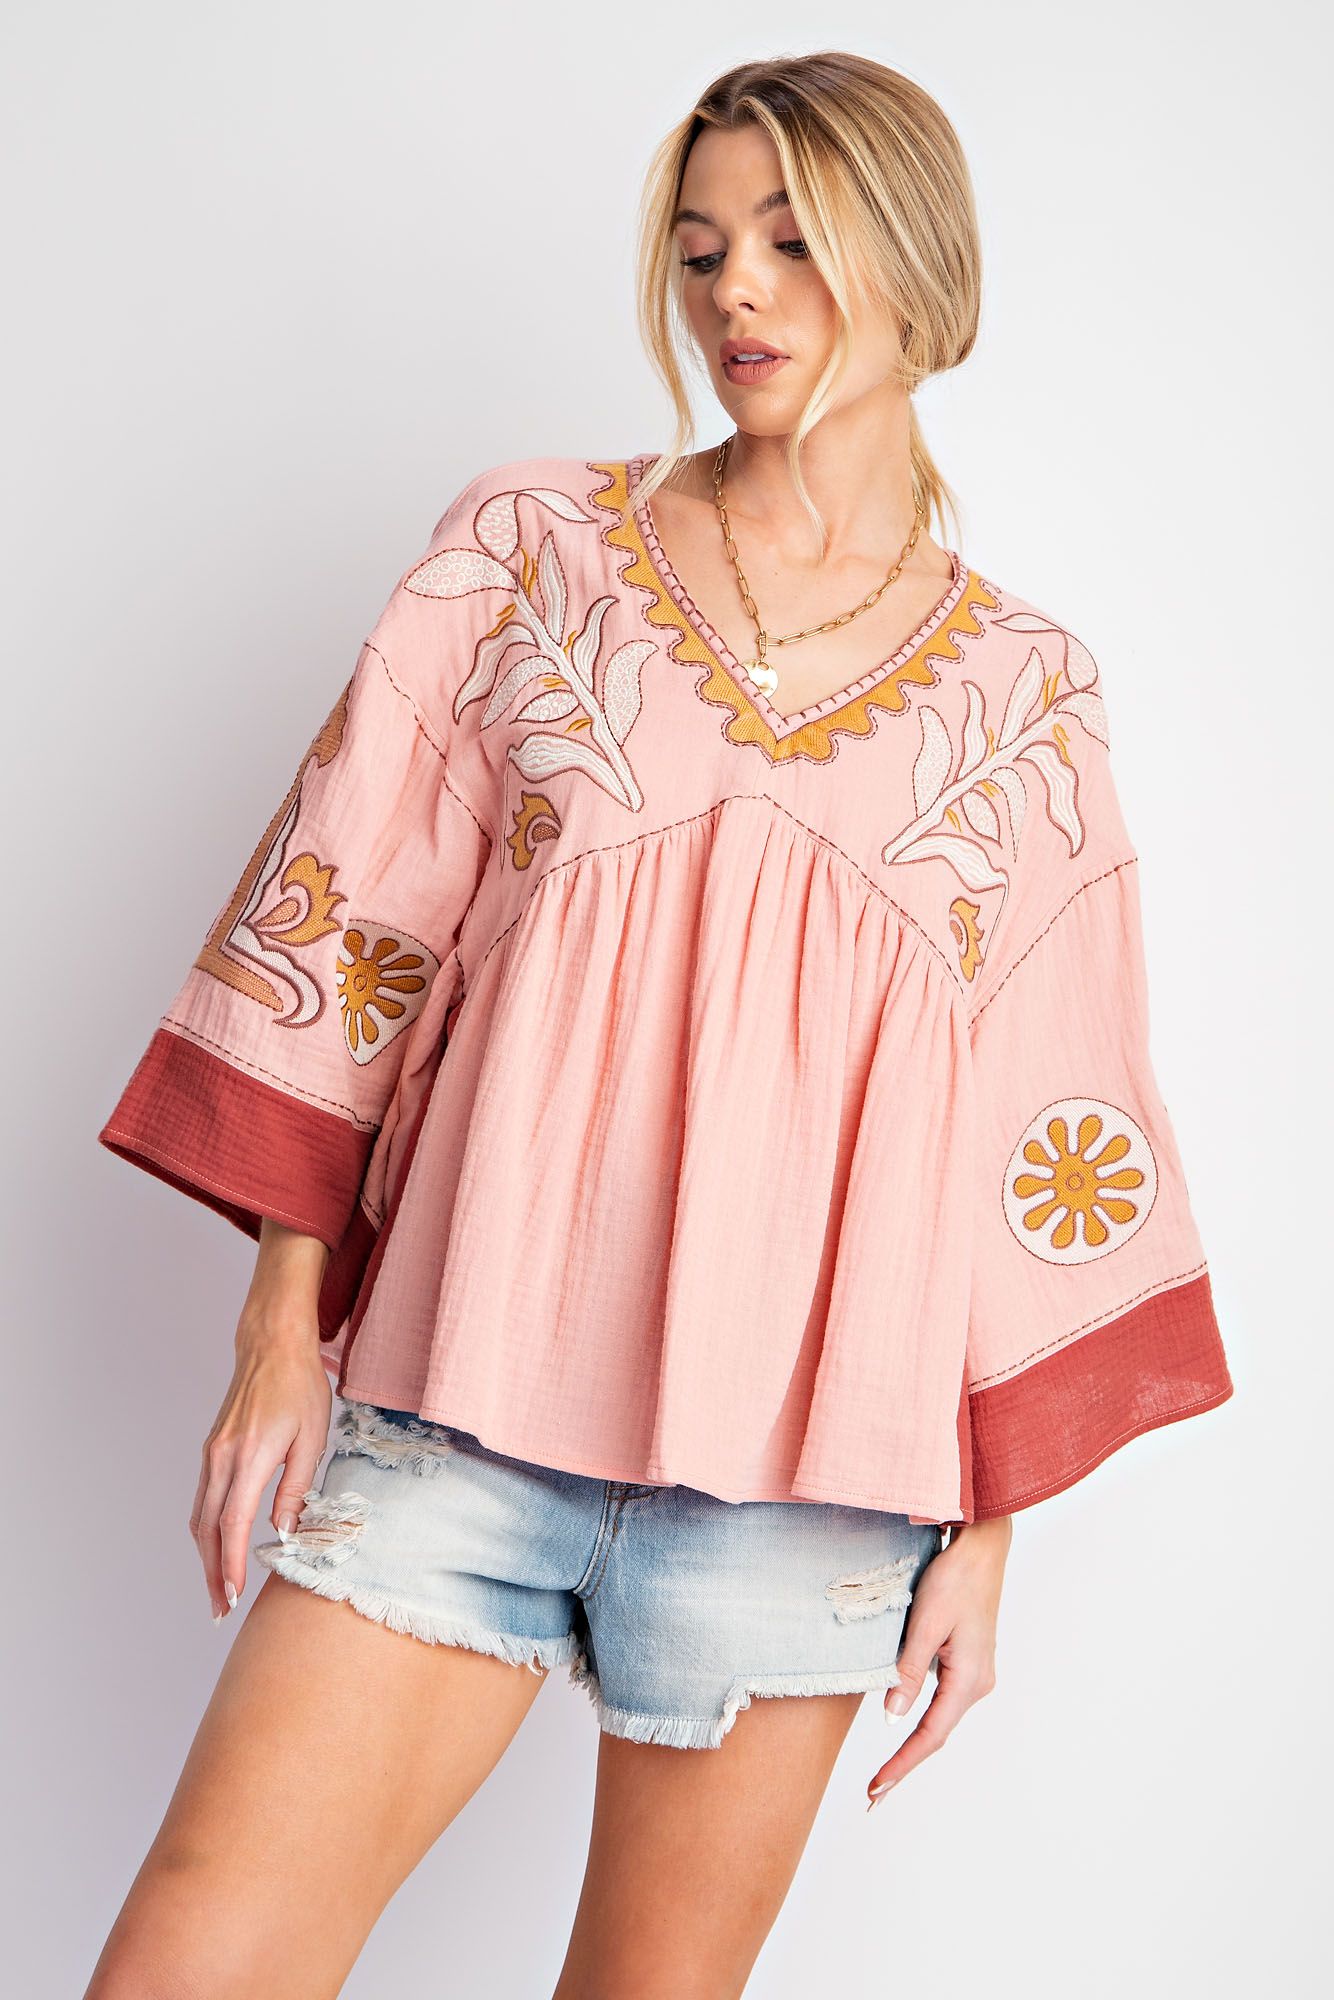 Wonderland Embroidered Blouse 3 Colors (Small to Large)